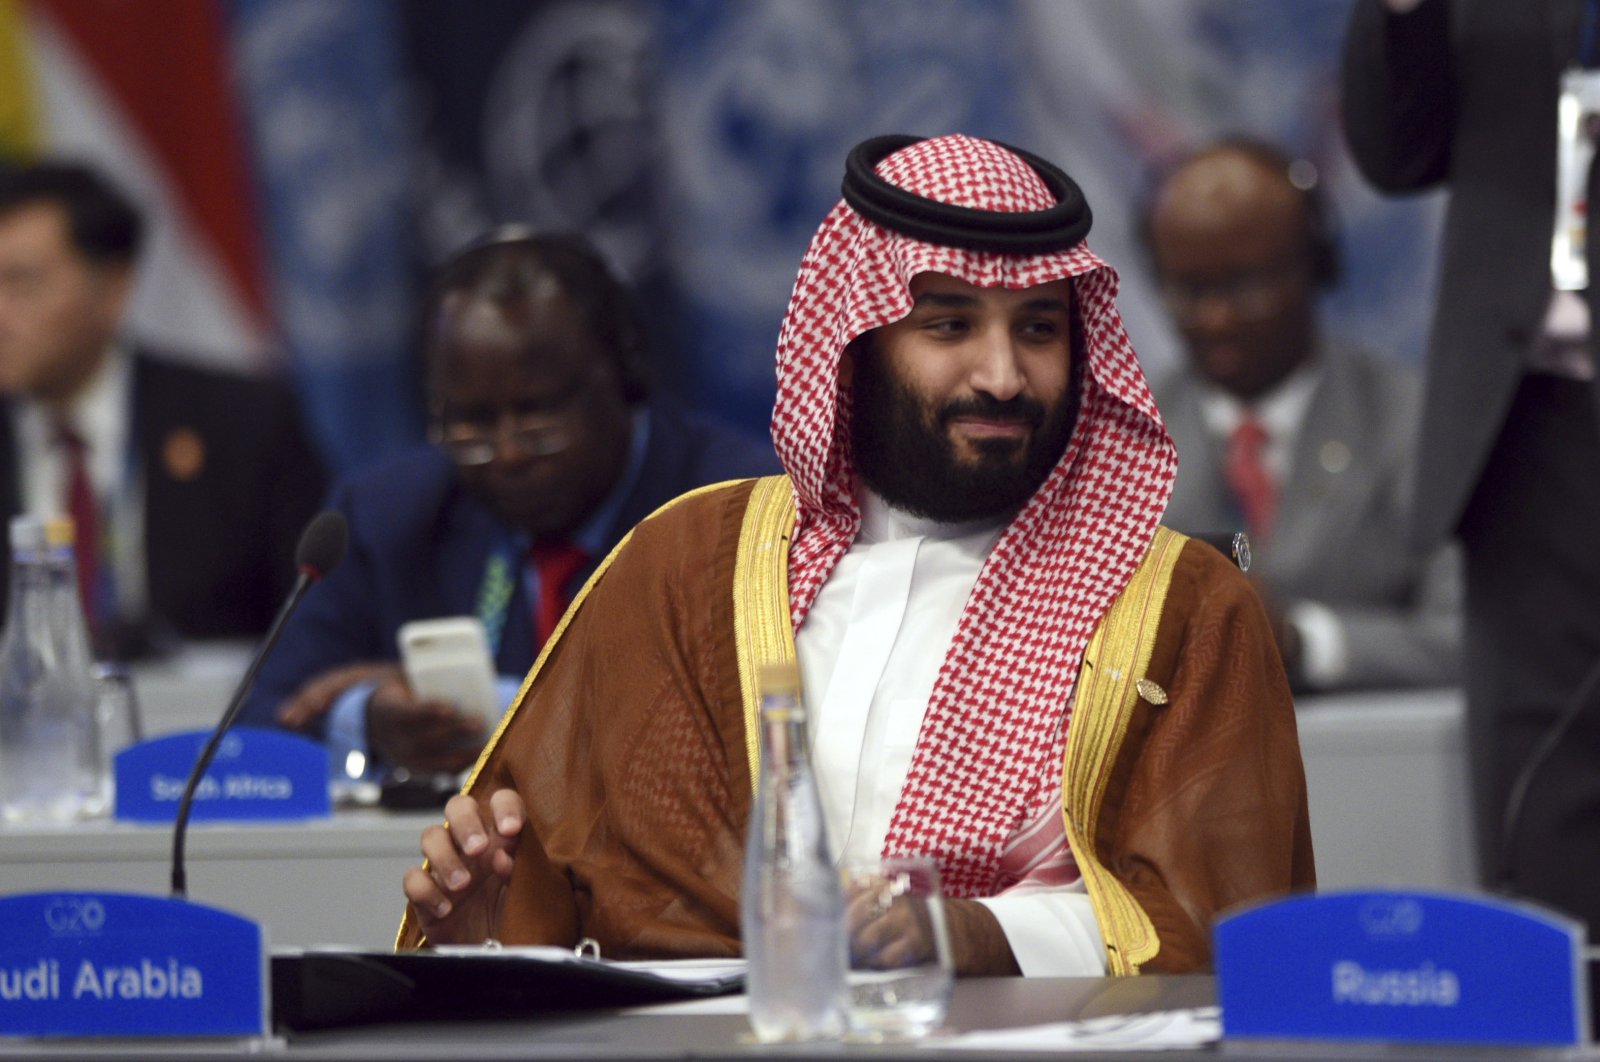 Saudi Arabia's Crown Prince Mohammed bin Salman attends a plenary session during the G-20 leader's summit, Buenos Aires, Argentina, Dec. 1, 2018. (AP Photo)